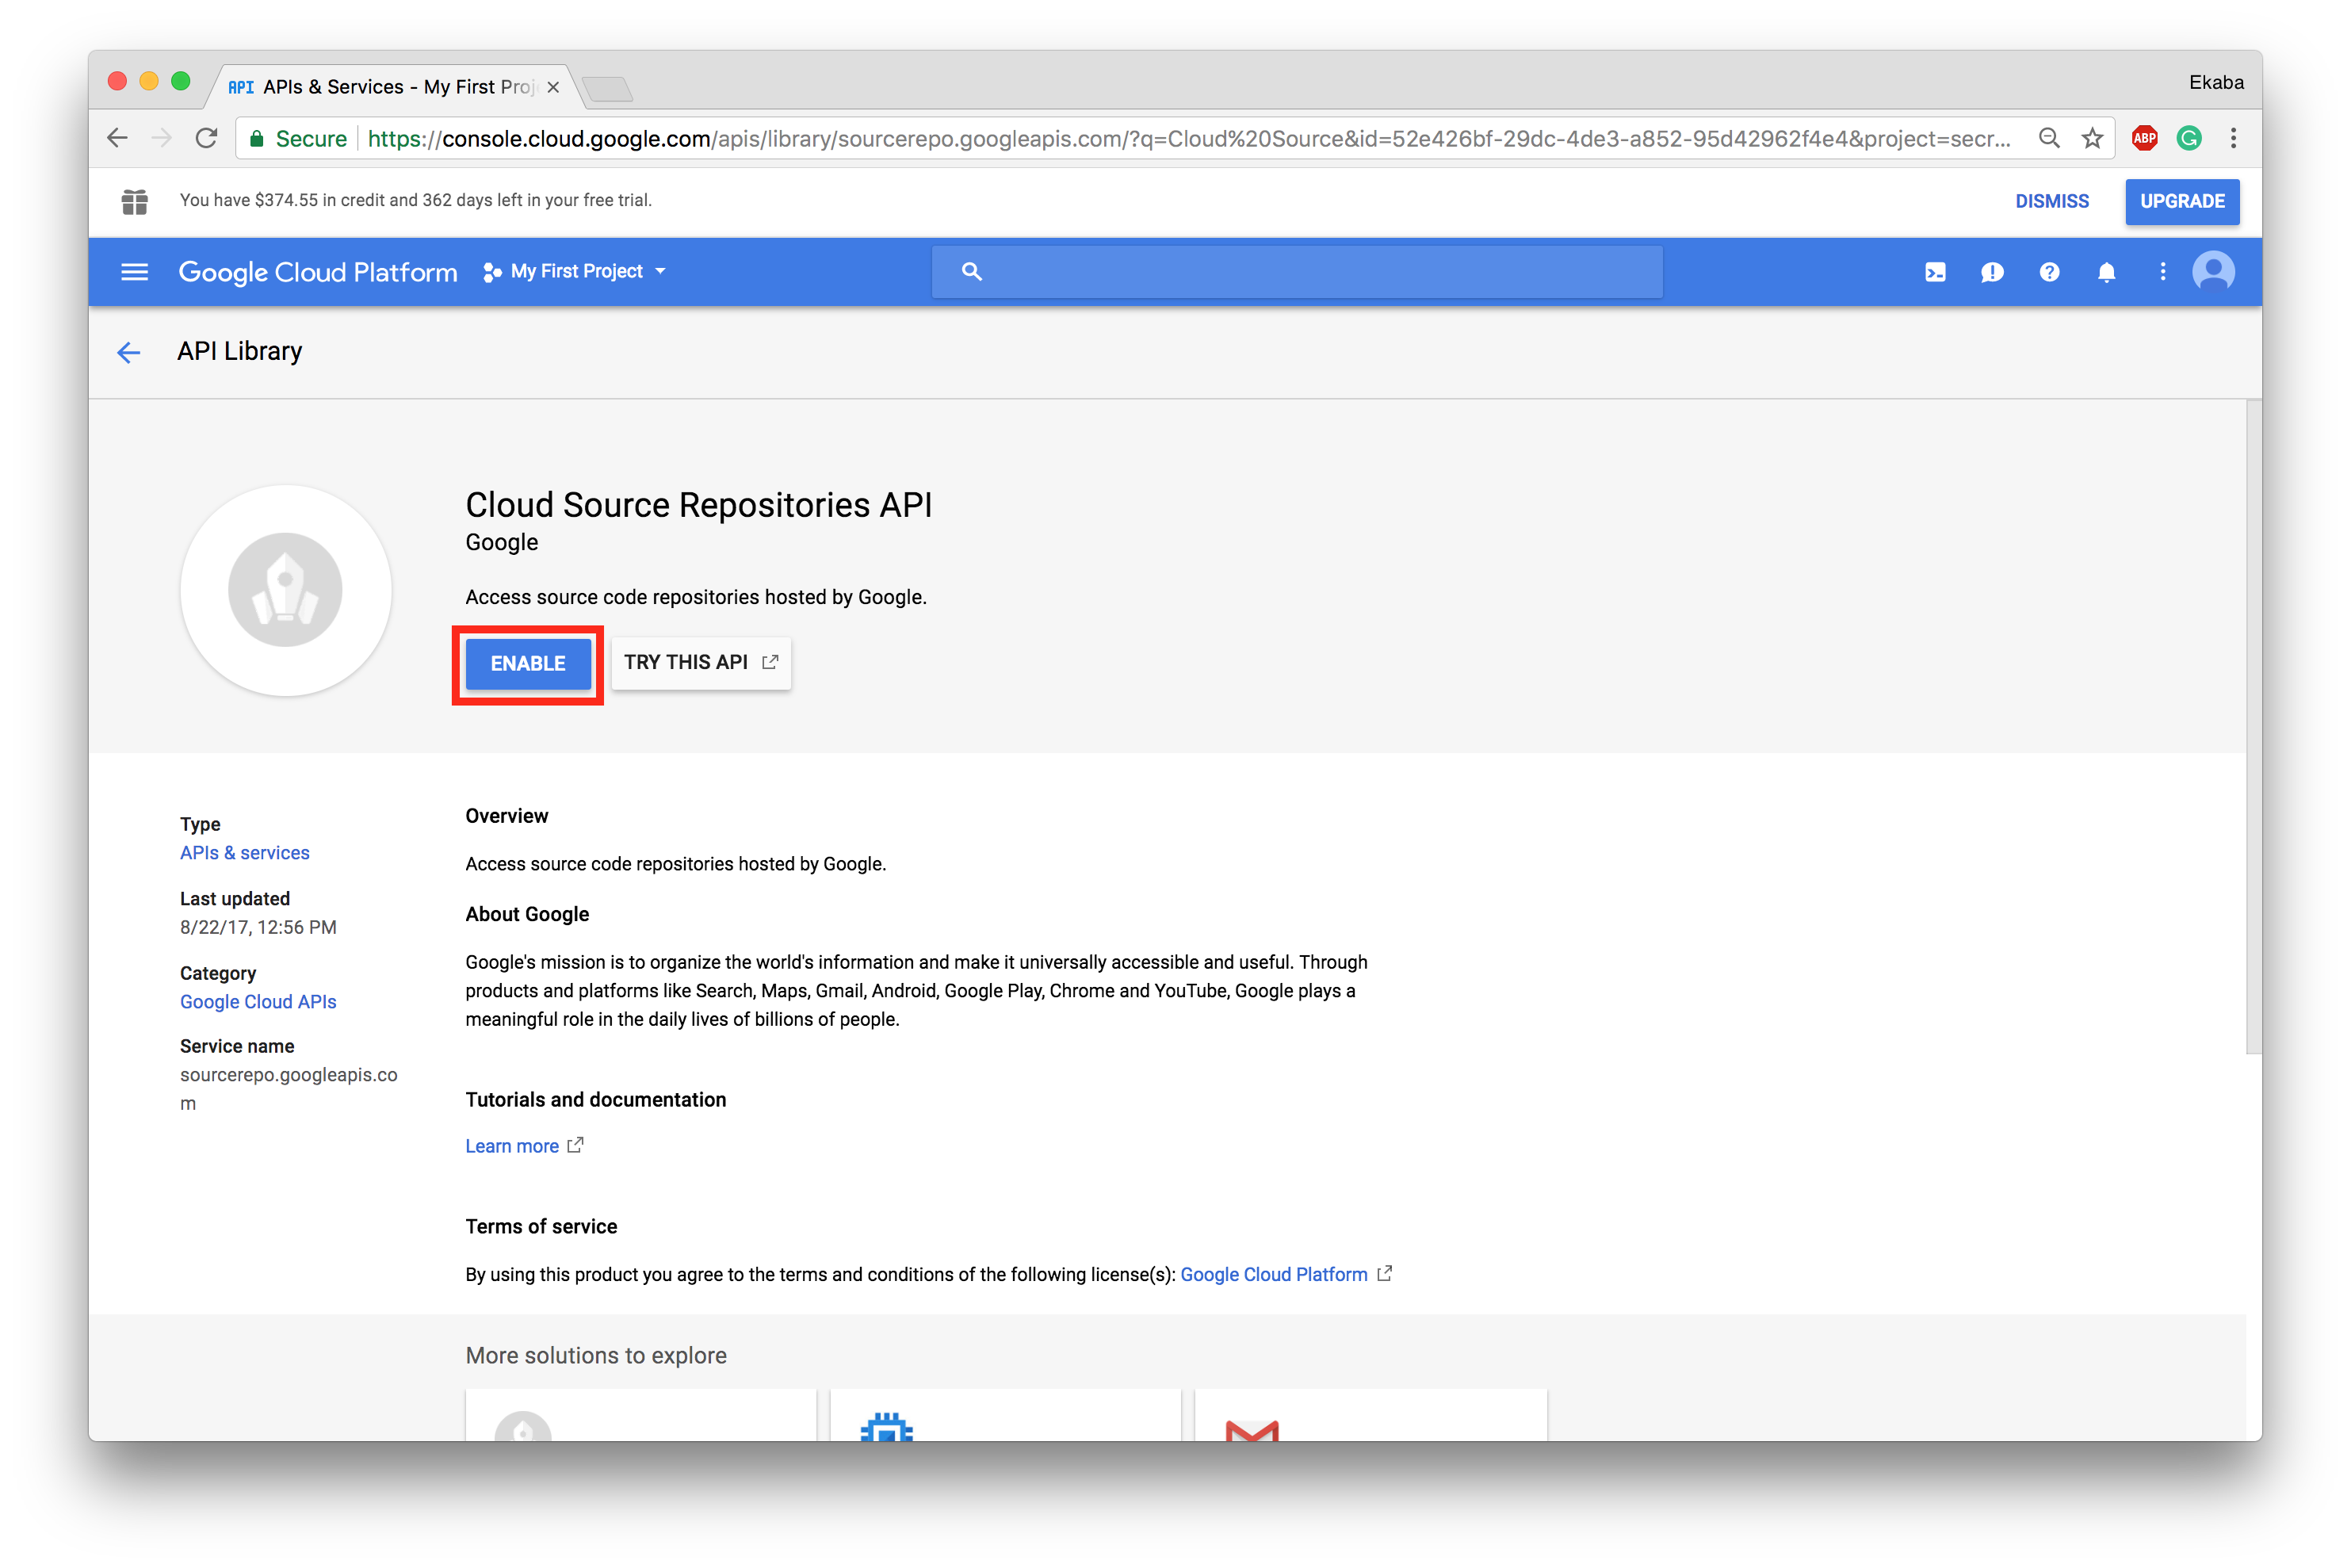 Enable Cloud Source Repositories API.